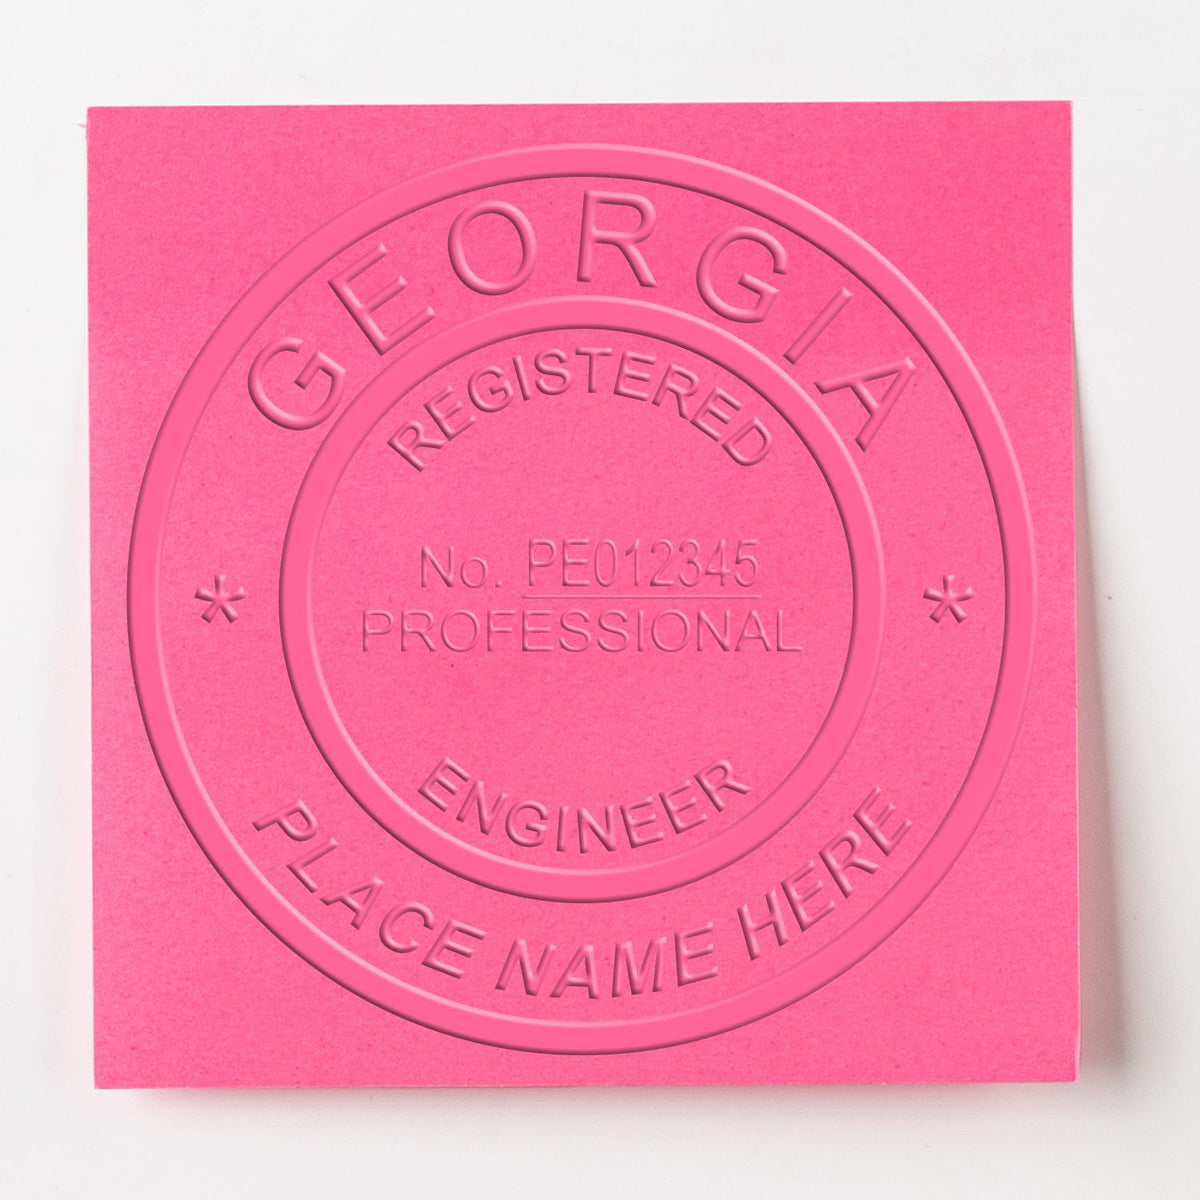 A photograph of the Heavy Duty Cast Iron Georgia Engineer Seal Embosser stamp impression reveals a vivid, professional image of the on paper.